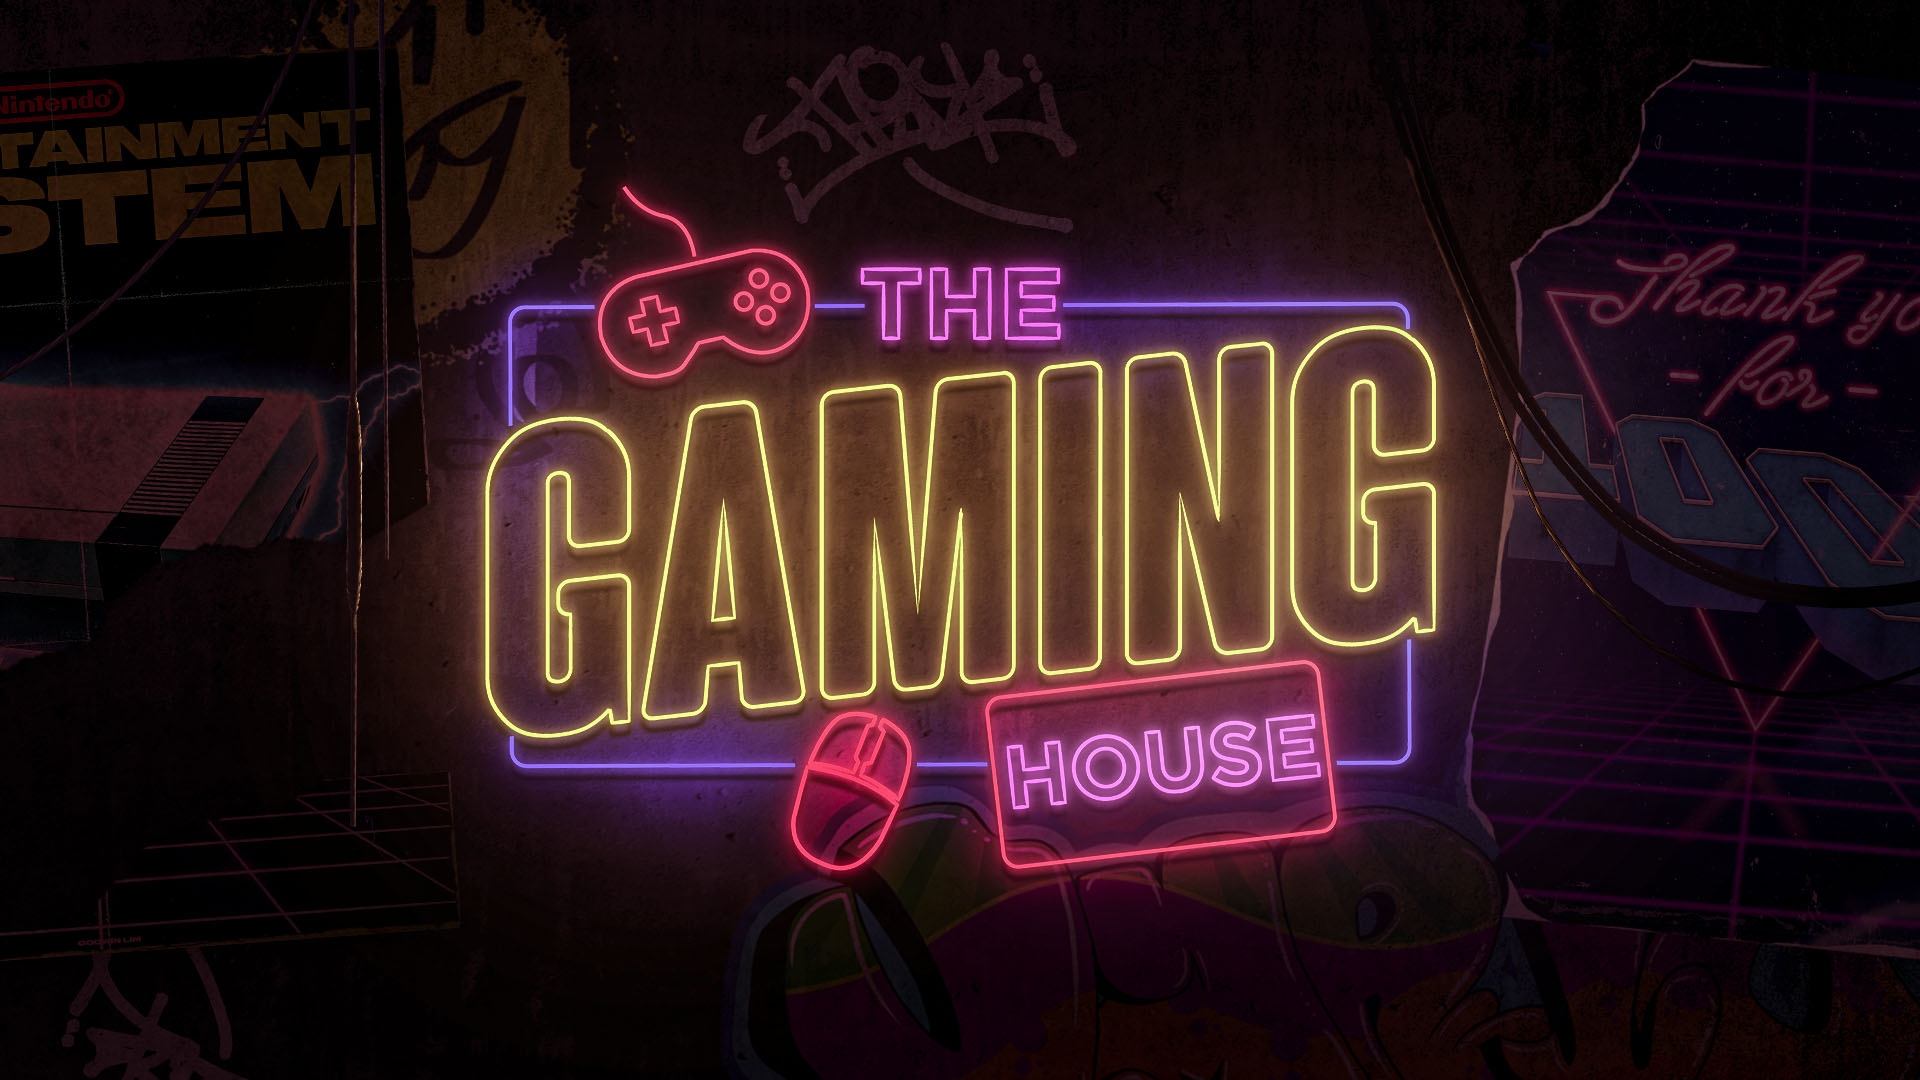 Tier One to launch “The Gaming House” the newest gaming reality show